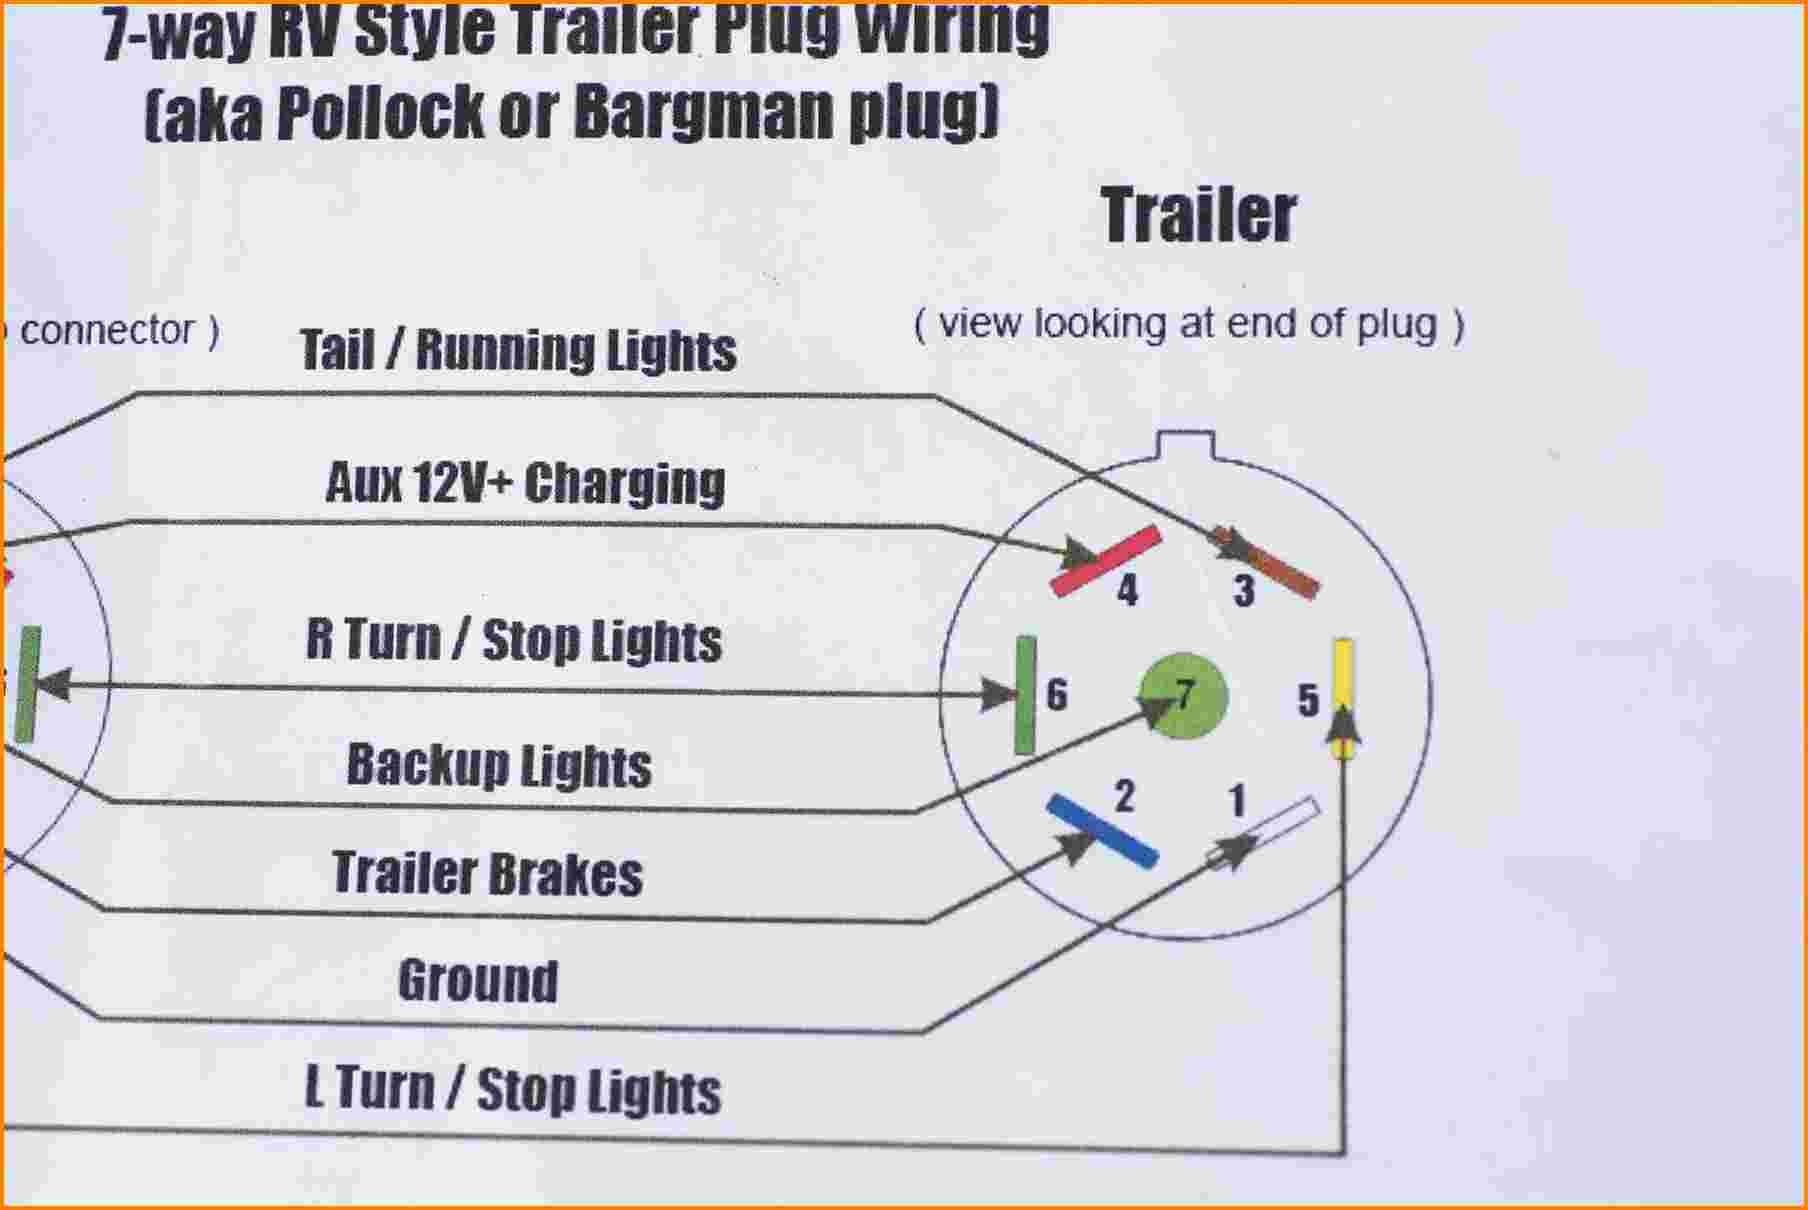 Pollak Trailer Connector Diagram 10 7 Pin Trailer Wiring Harness Motor within Connector Of Pollak Trailer Connector Diagram